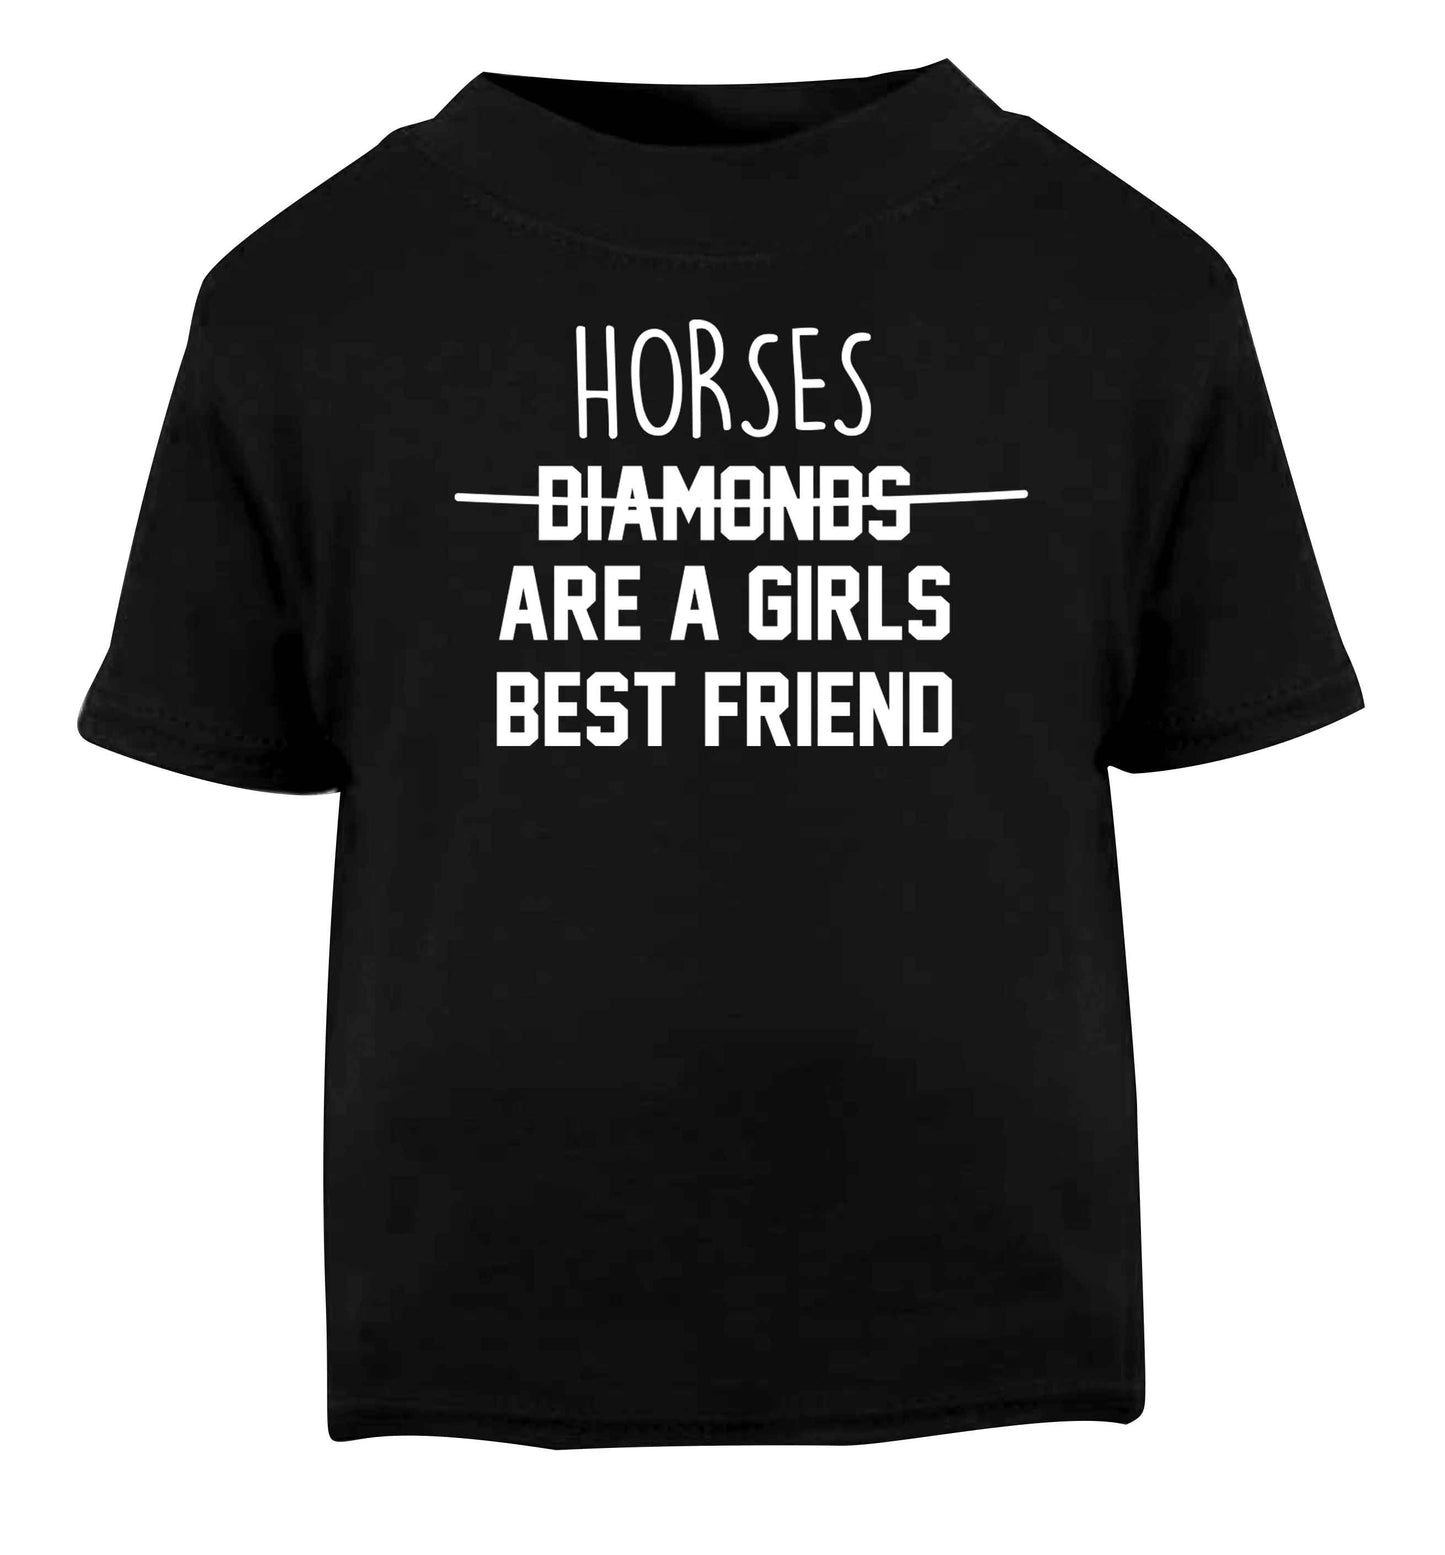 Horses are a girls best friend Black baby toddler Tshirt 2 years